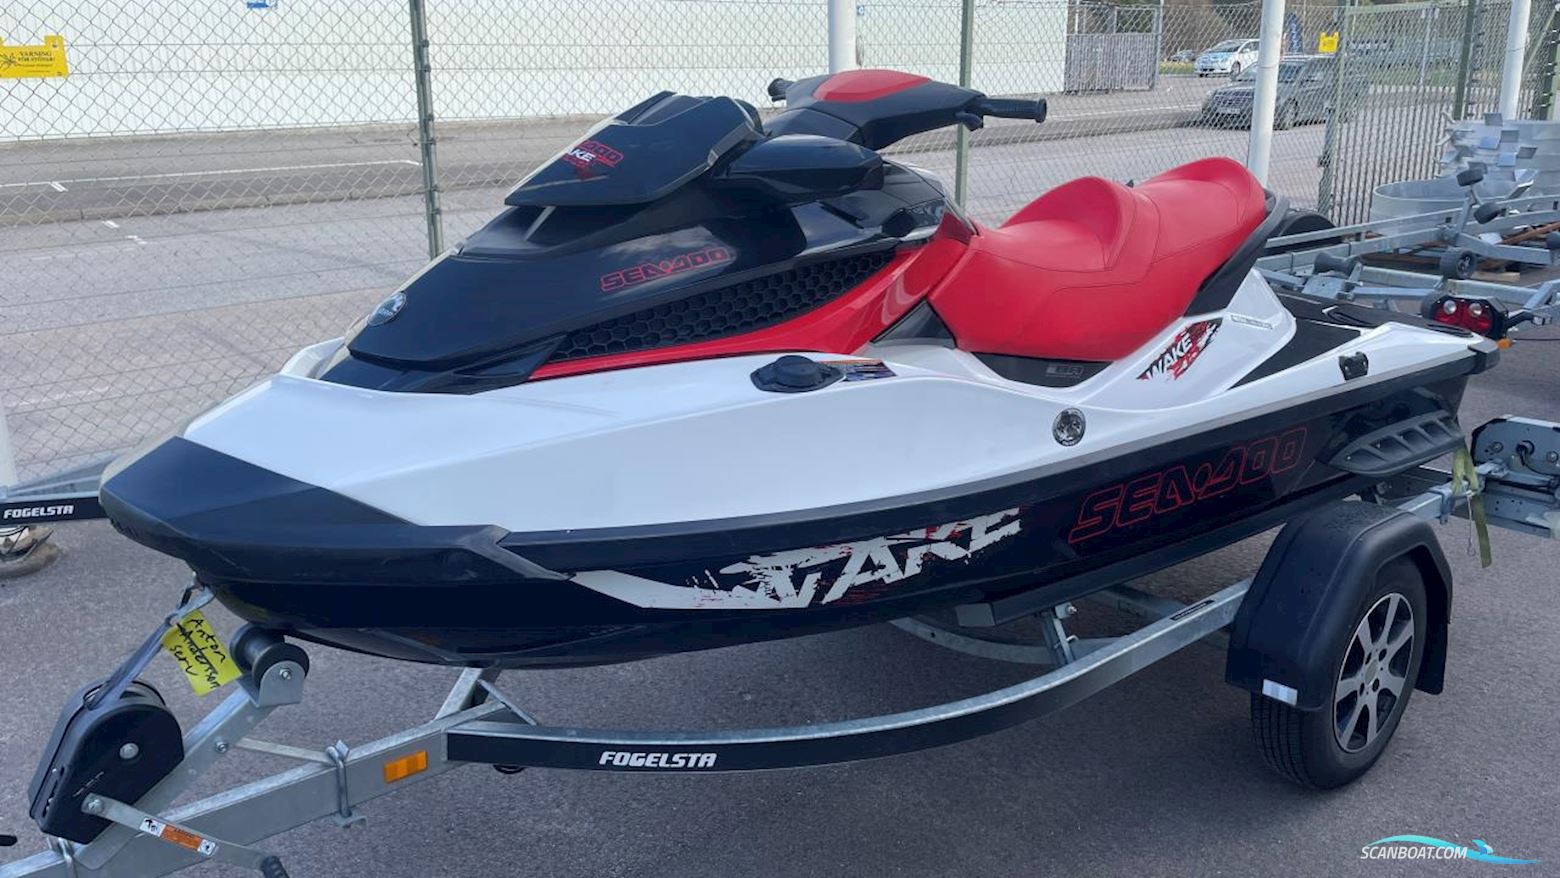 Sea-Doo Wake Pro 215 Motor boat 2010, with Rotax engine, Sweden